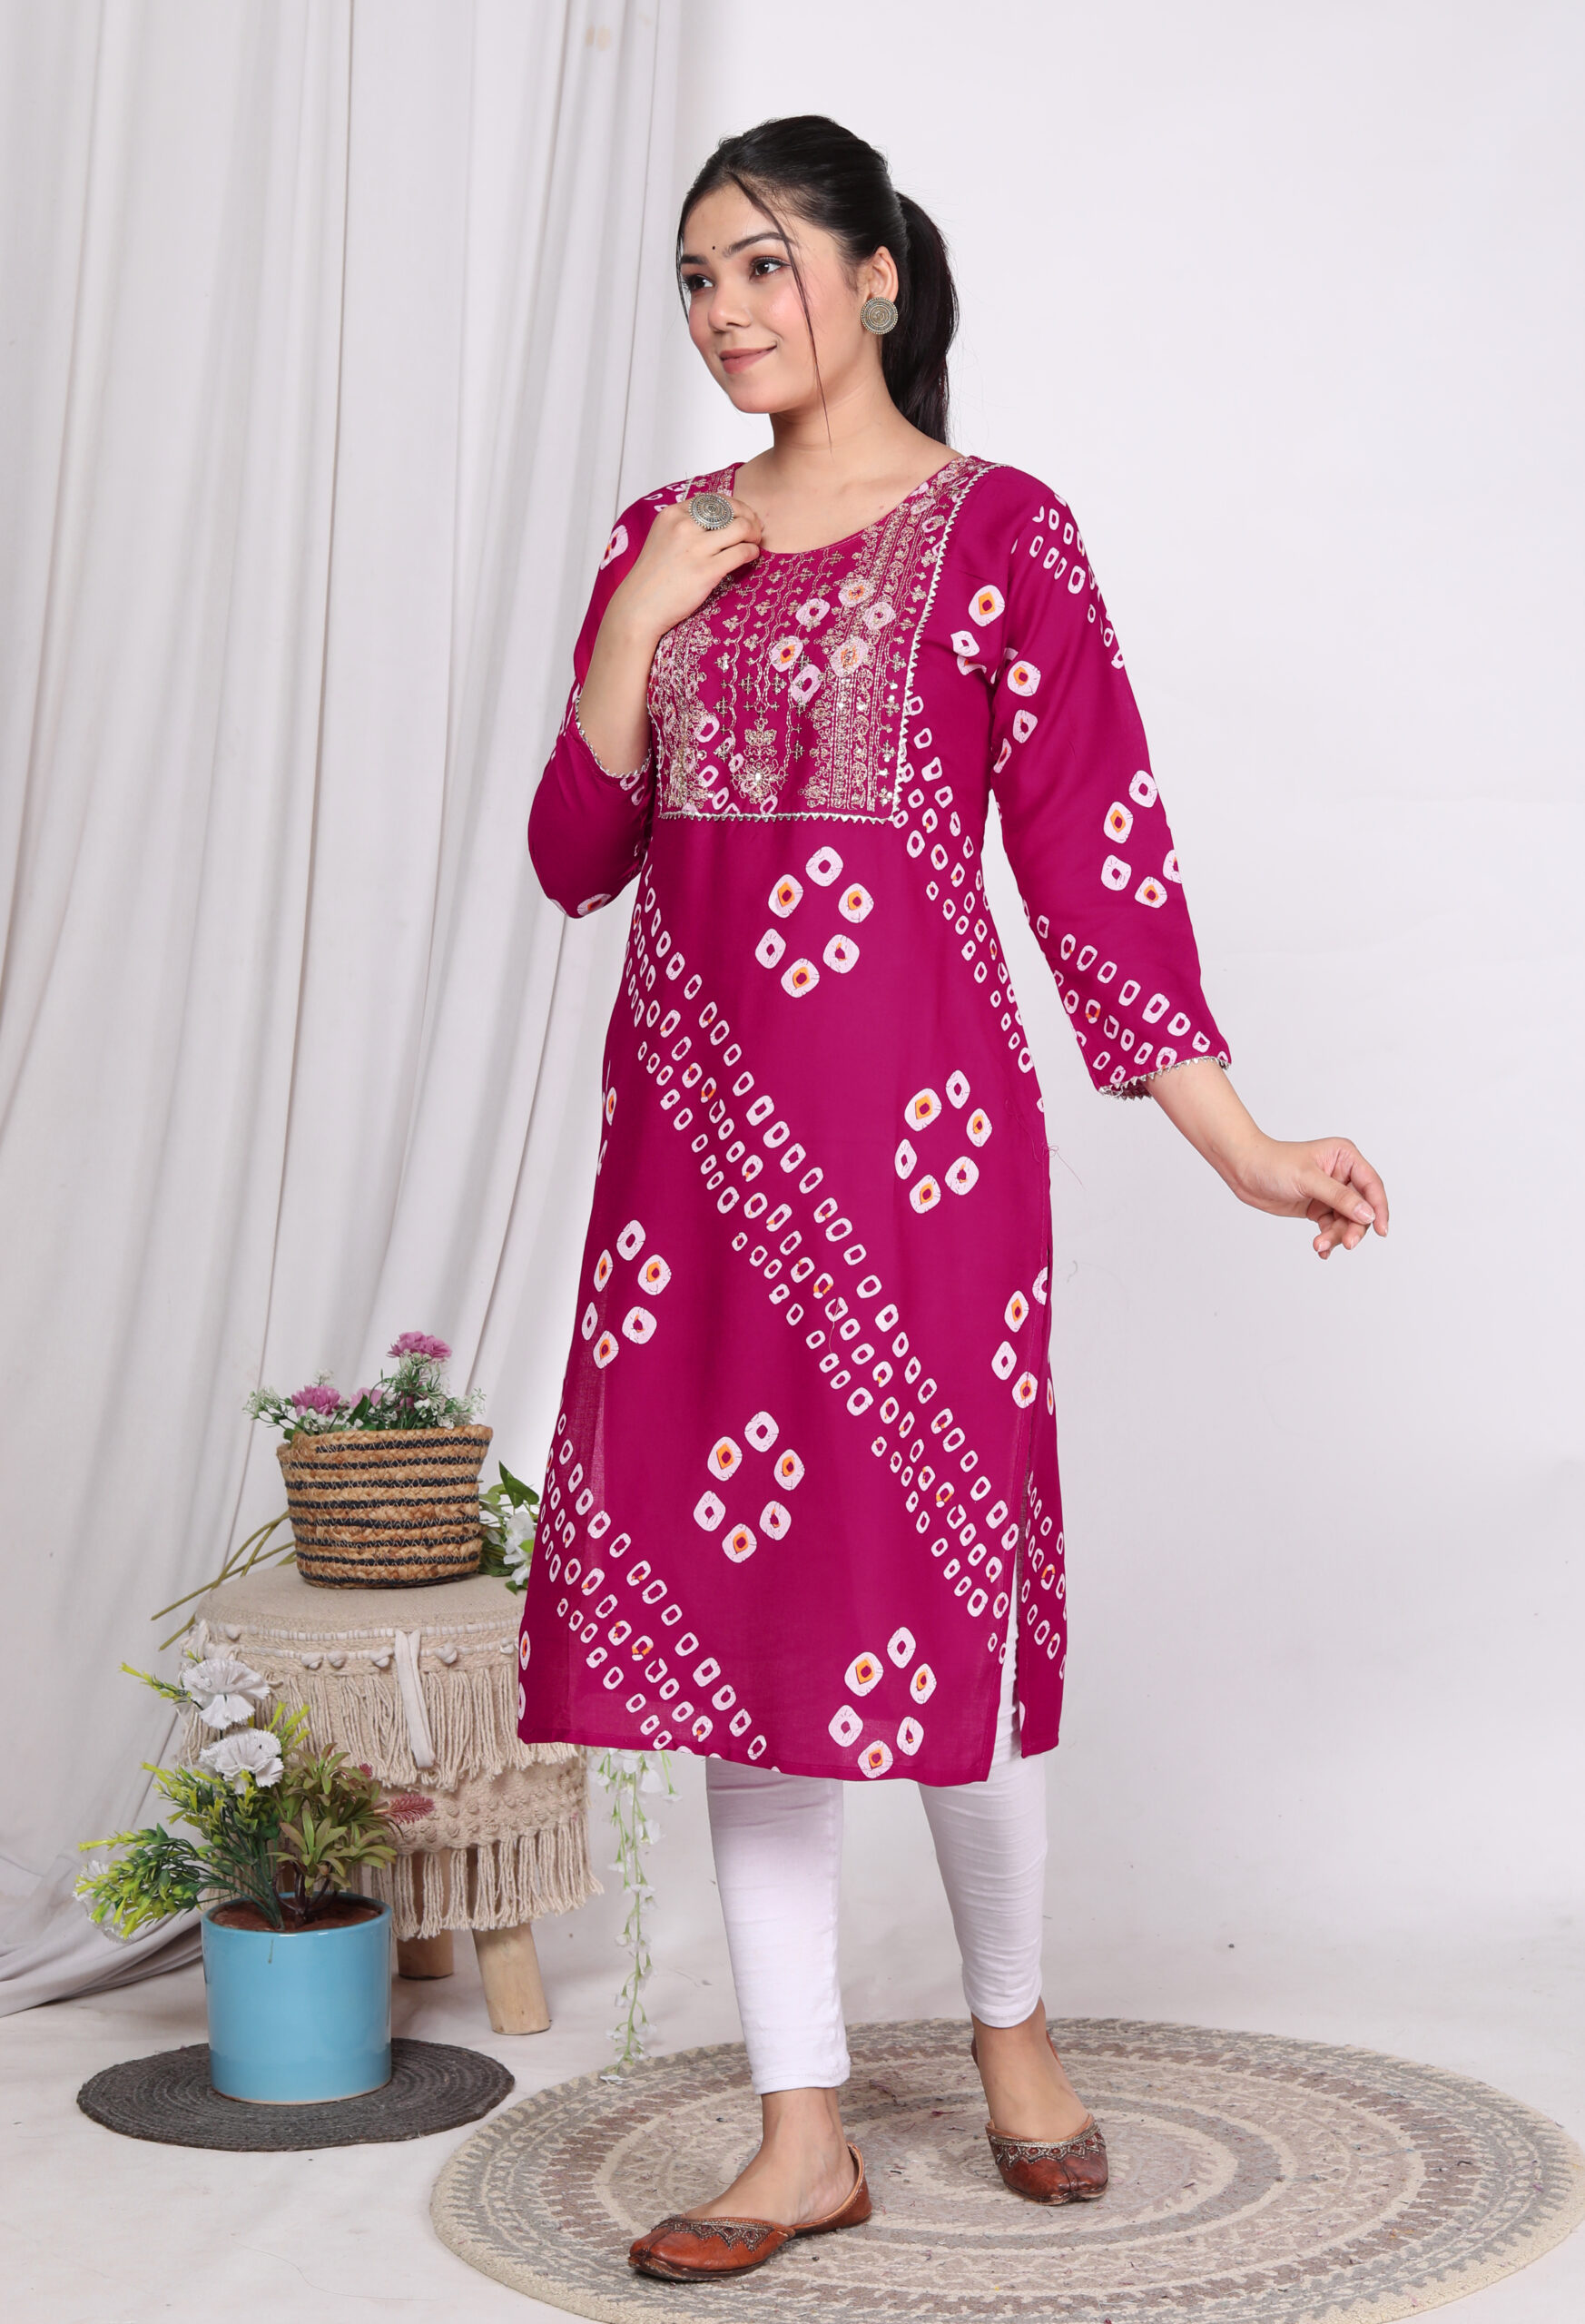 D.A.Kurtis Women Chikan Embroidery A-line Kurta - Buy D.A.Kurtis Women  Chikan Embroidery A-line Kurta Online at Best Prices in India | Flipkart.com